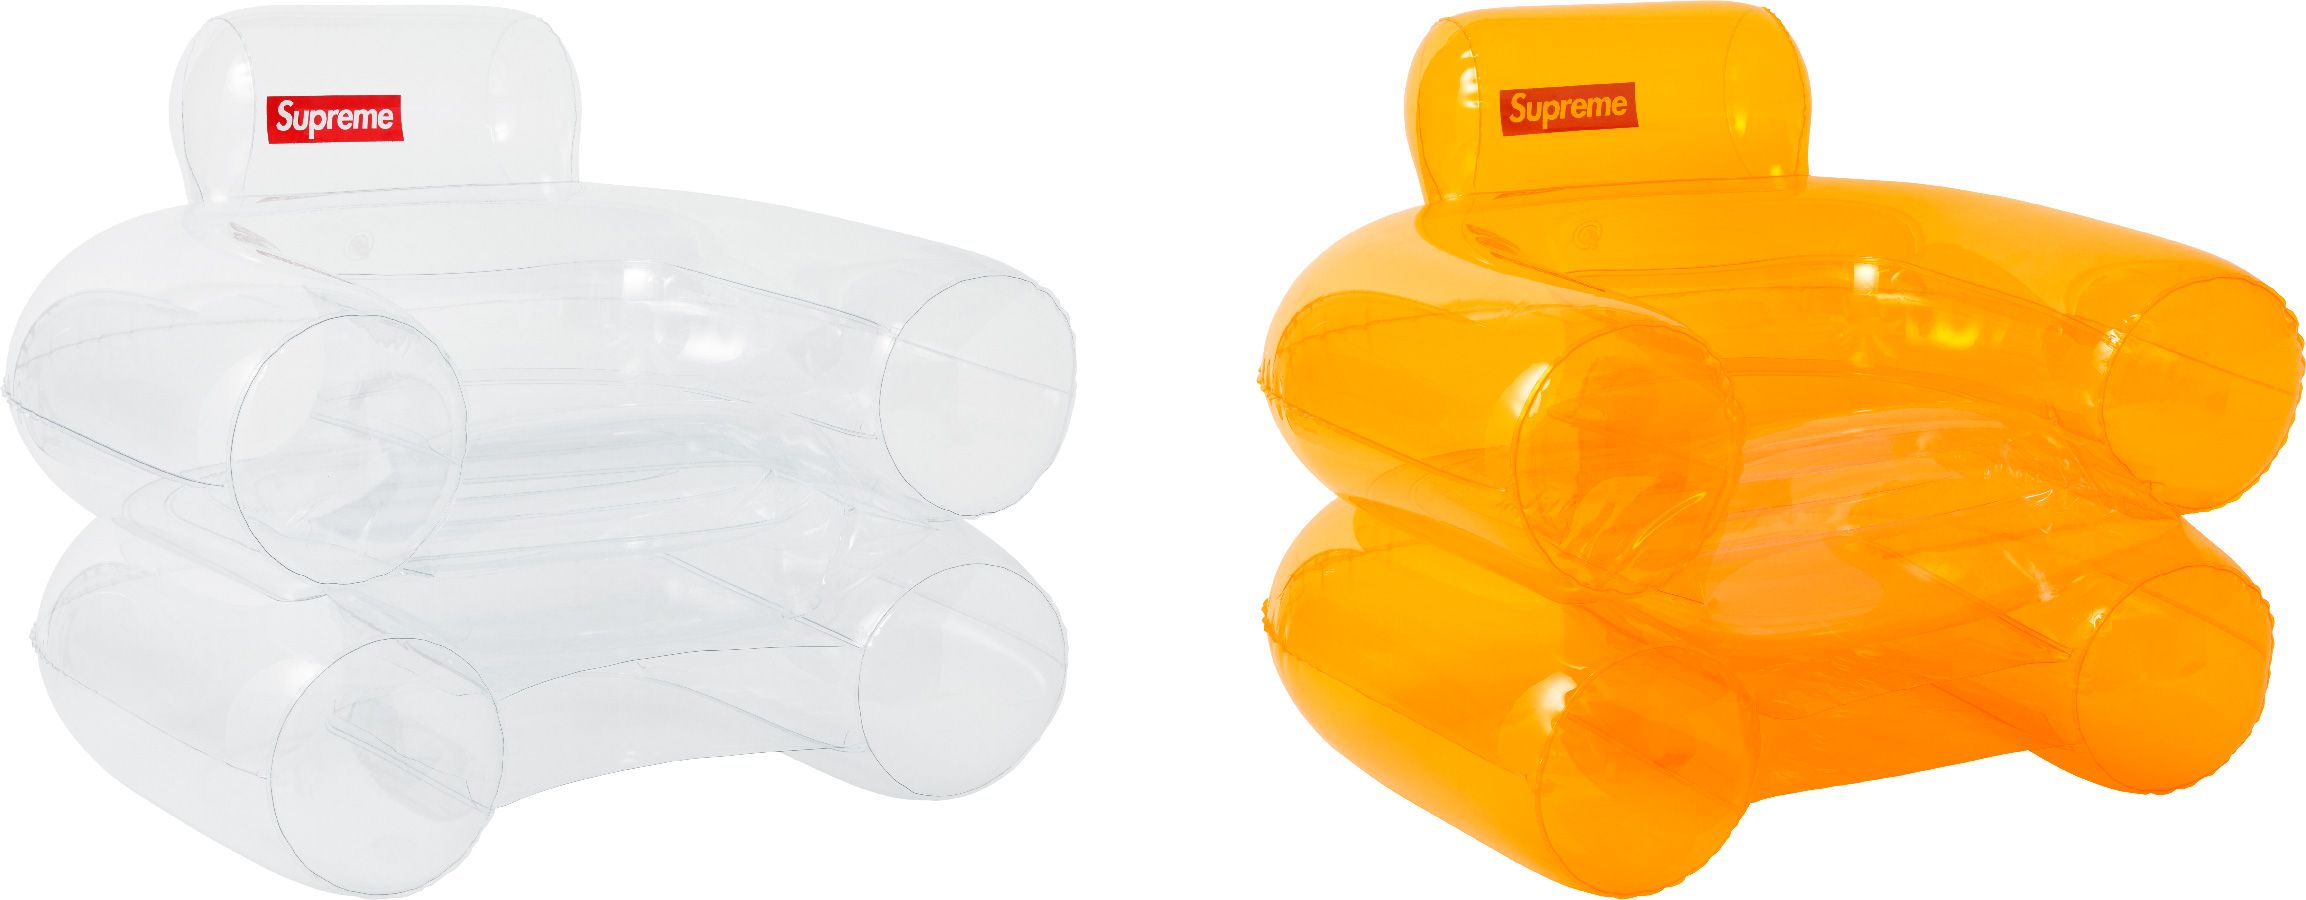 Supreme inflatable chair ビニールソファ - その他